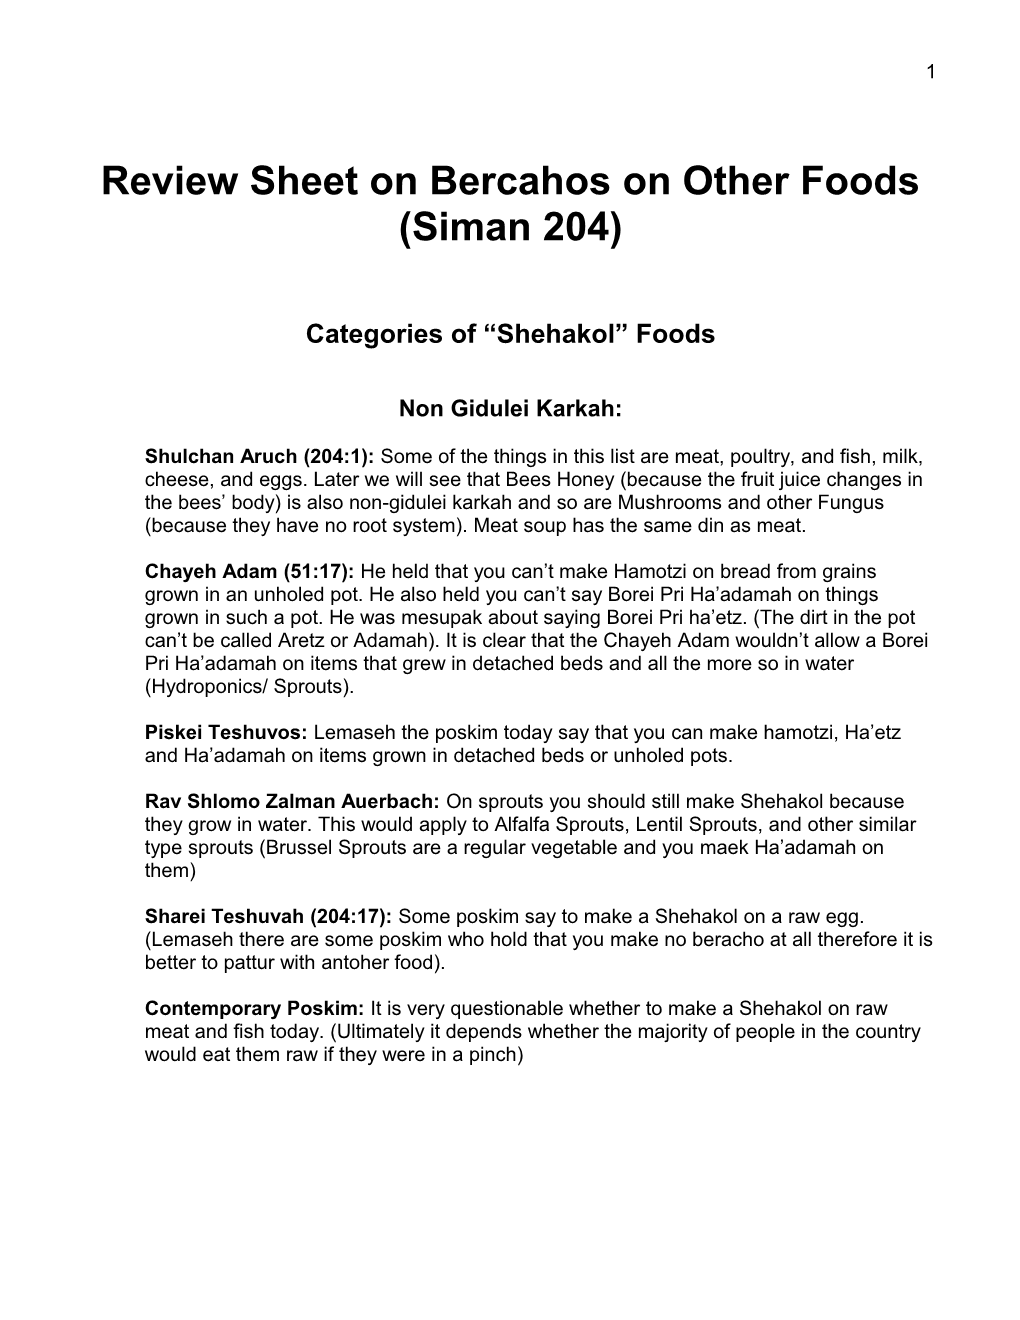 Review Sheet on Bercahos on Other Foods (Siman 204)